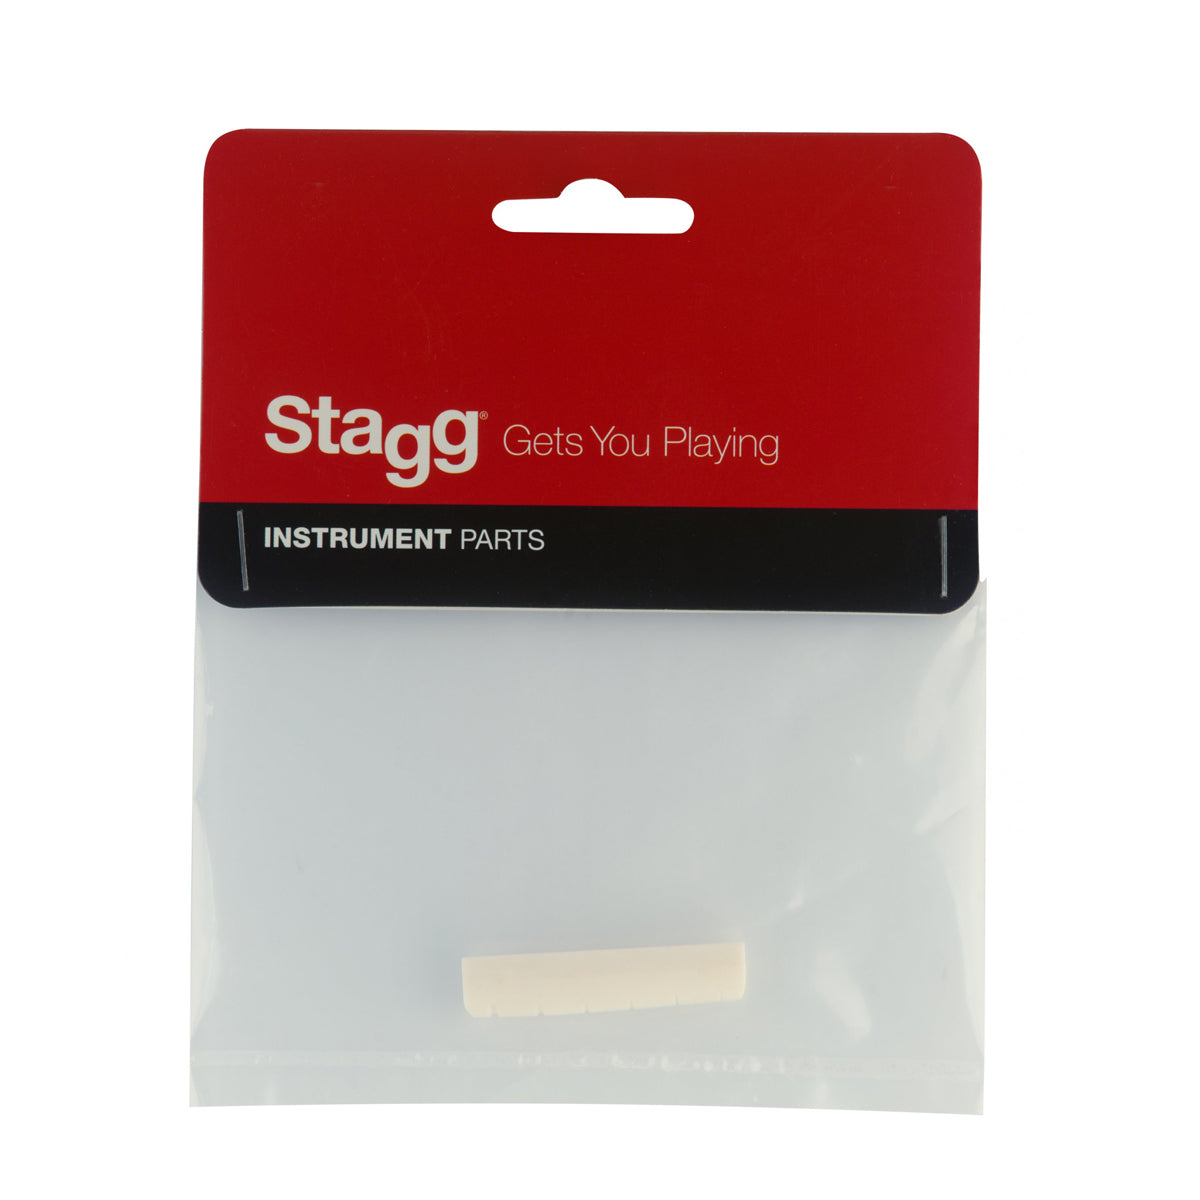 Stagg Pre-Slotted Bone Nut for Acoustic Guitar